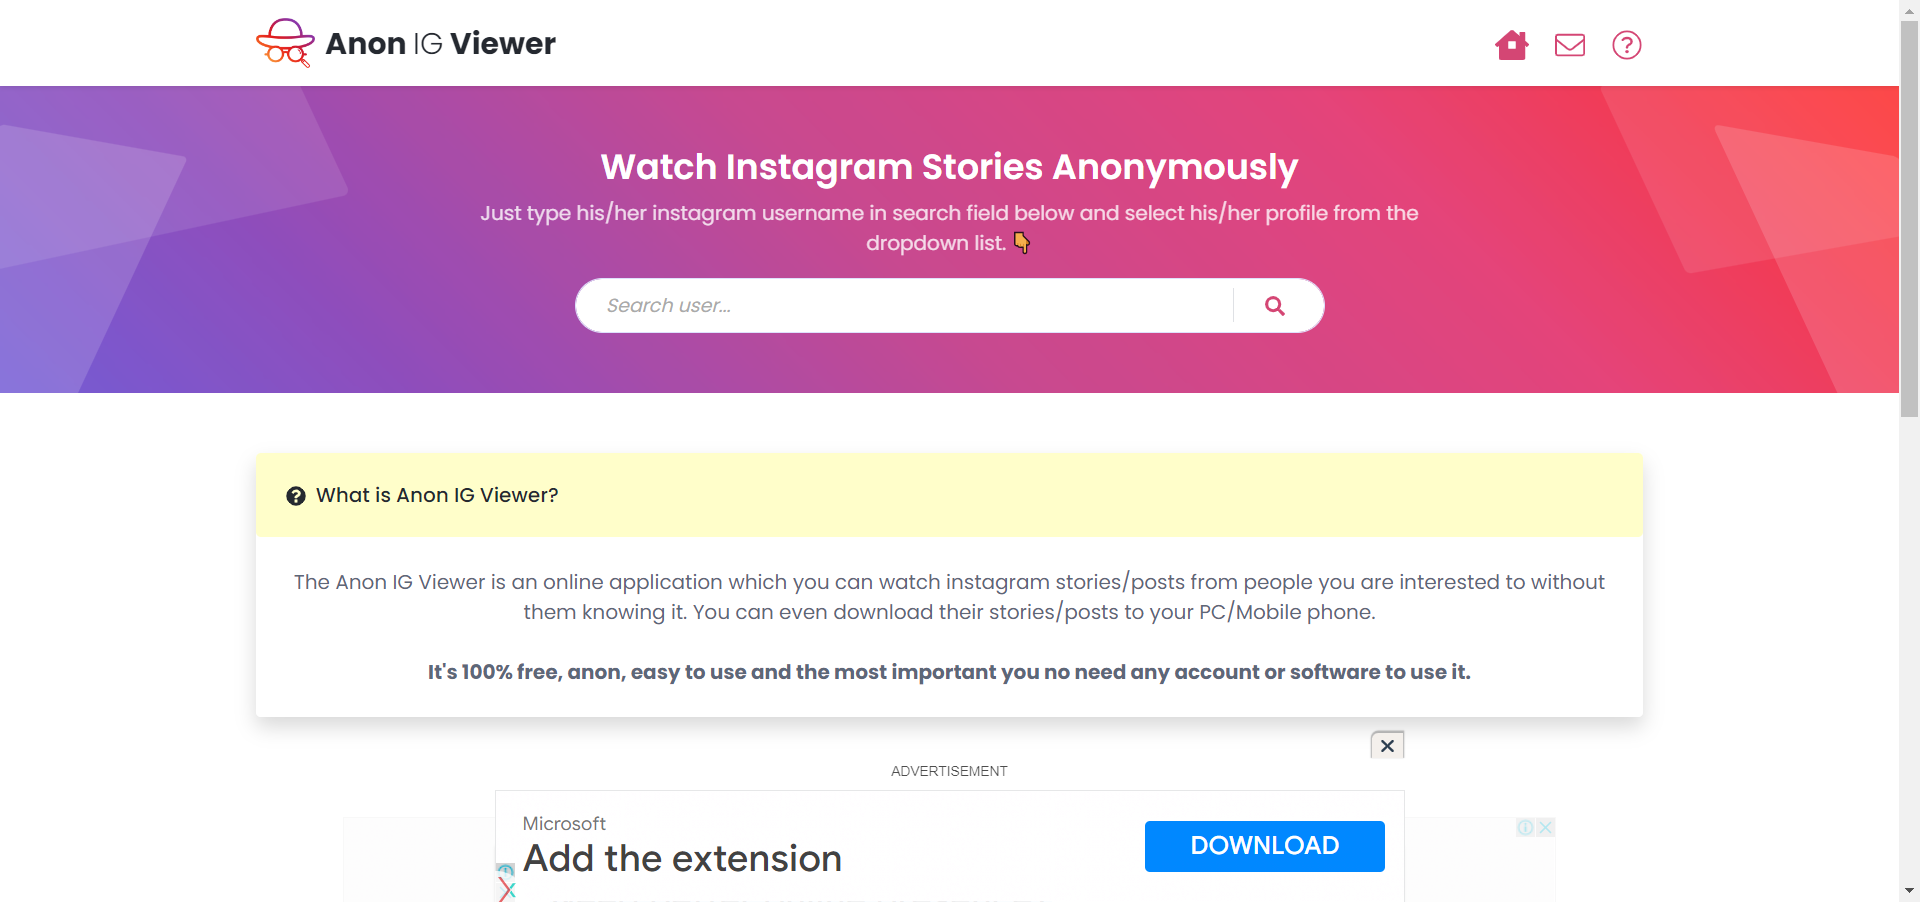 Anon IG Viewer main page